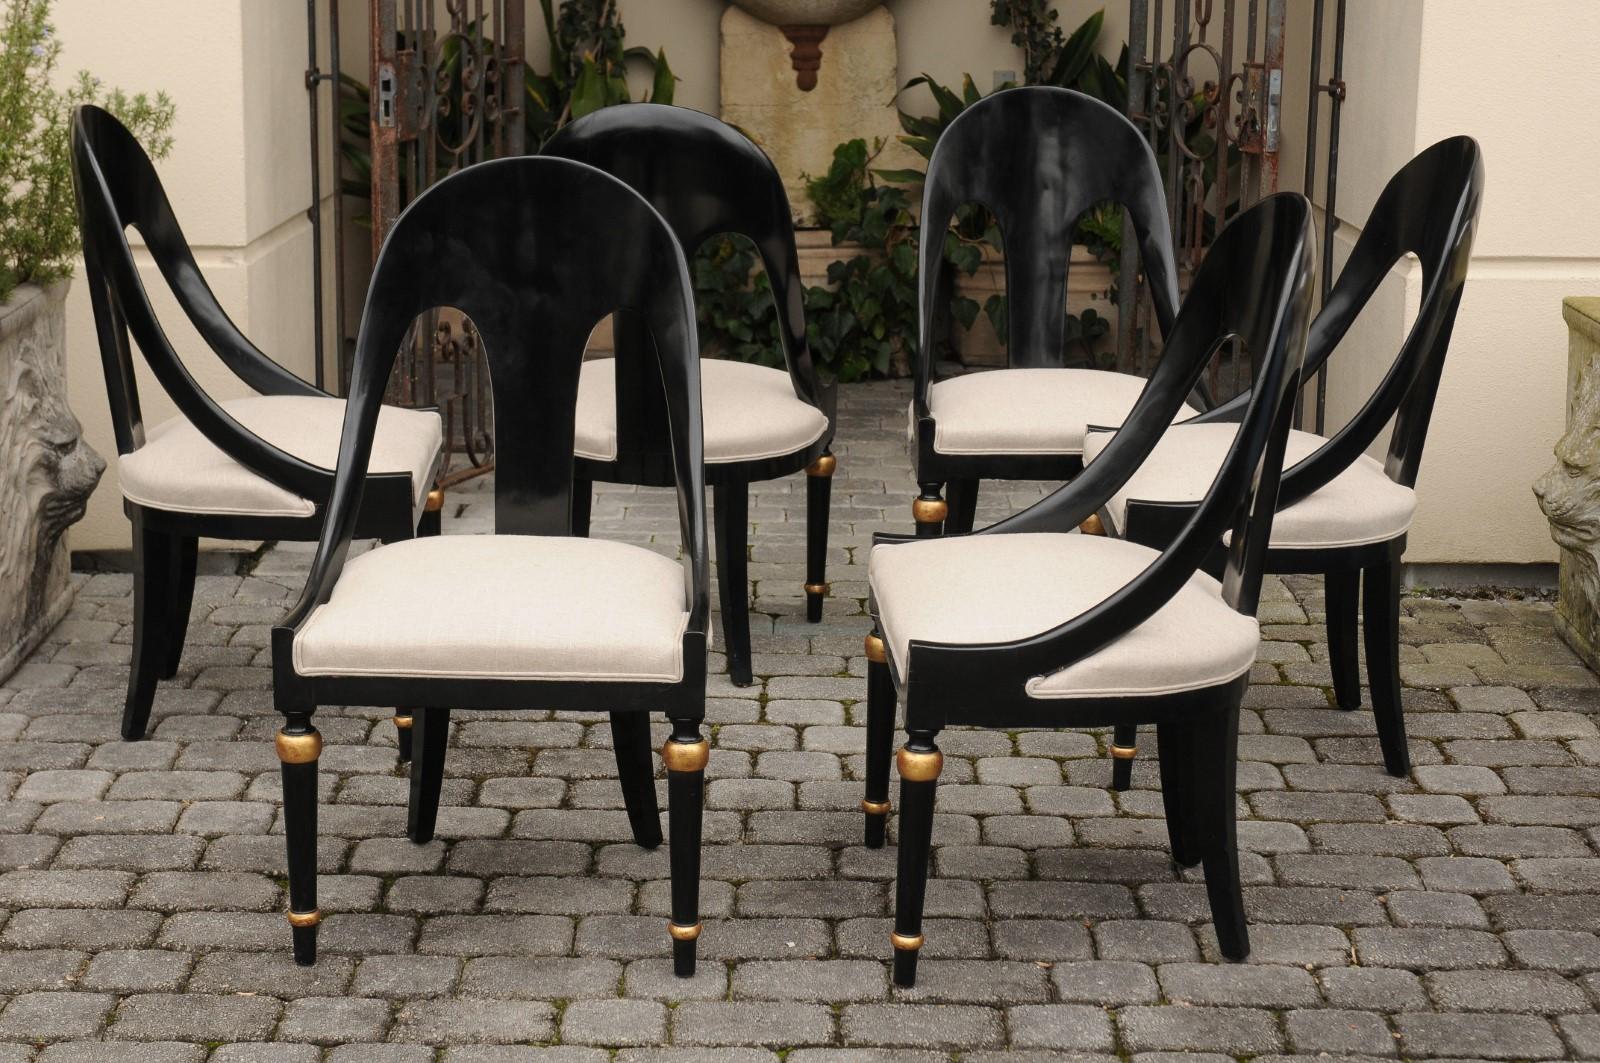 20th Century Set of Six Vintage Ebonized Wood Upholstered Spoon Back Chairs with Gilt Accents